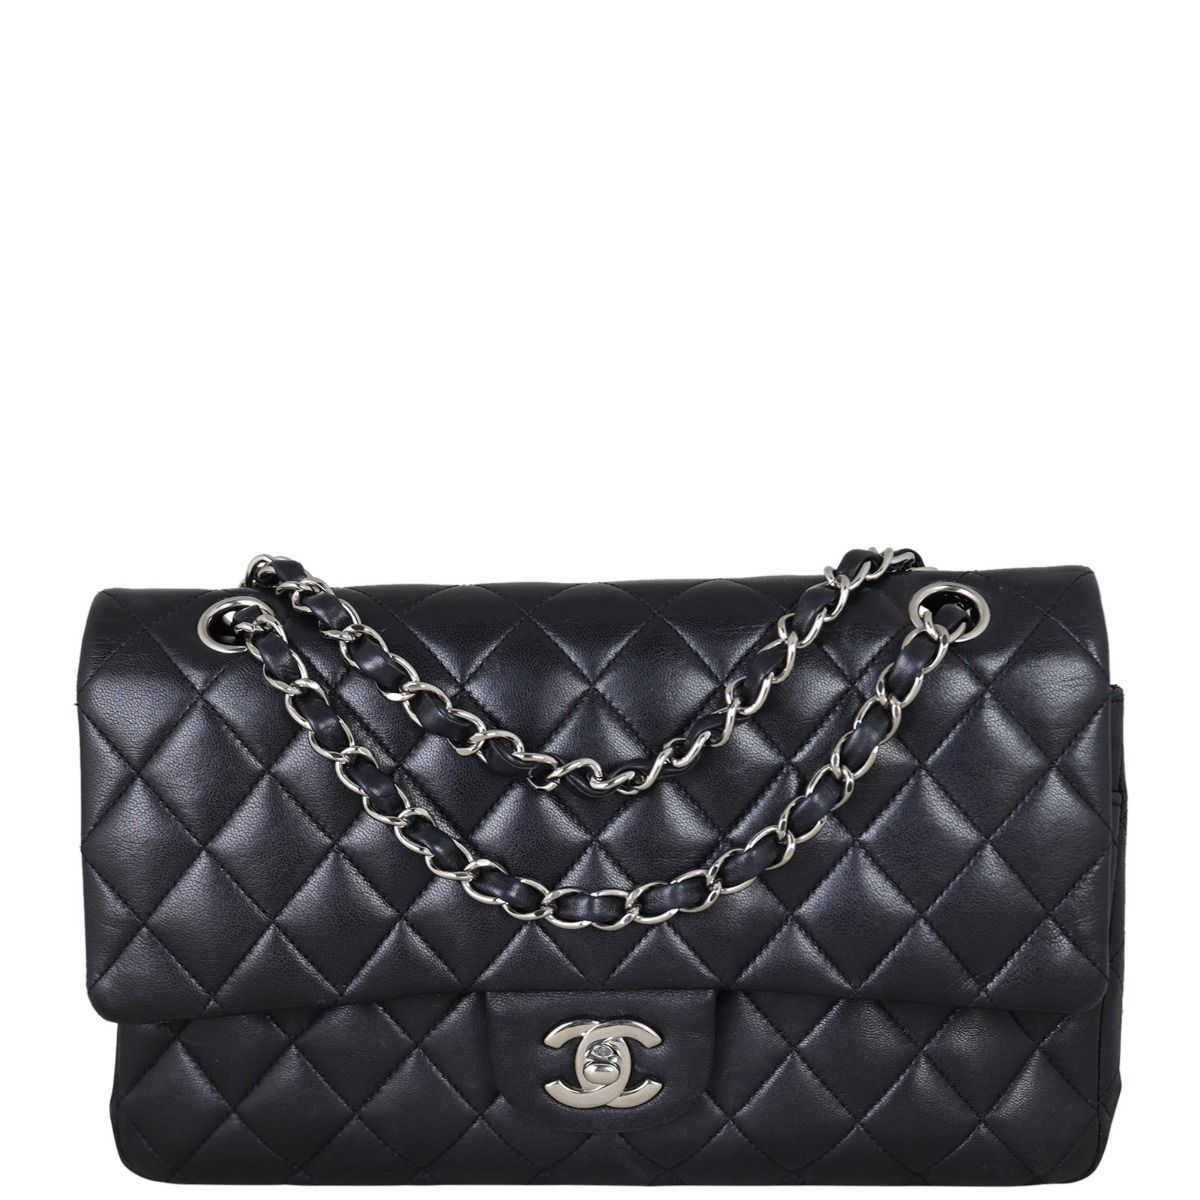 Chanel Metallic Silver Quilted Lambskin Classic Double Flap Medium  Q6B0104NV0008